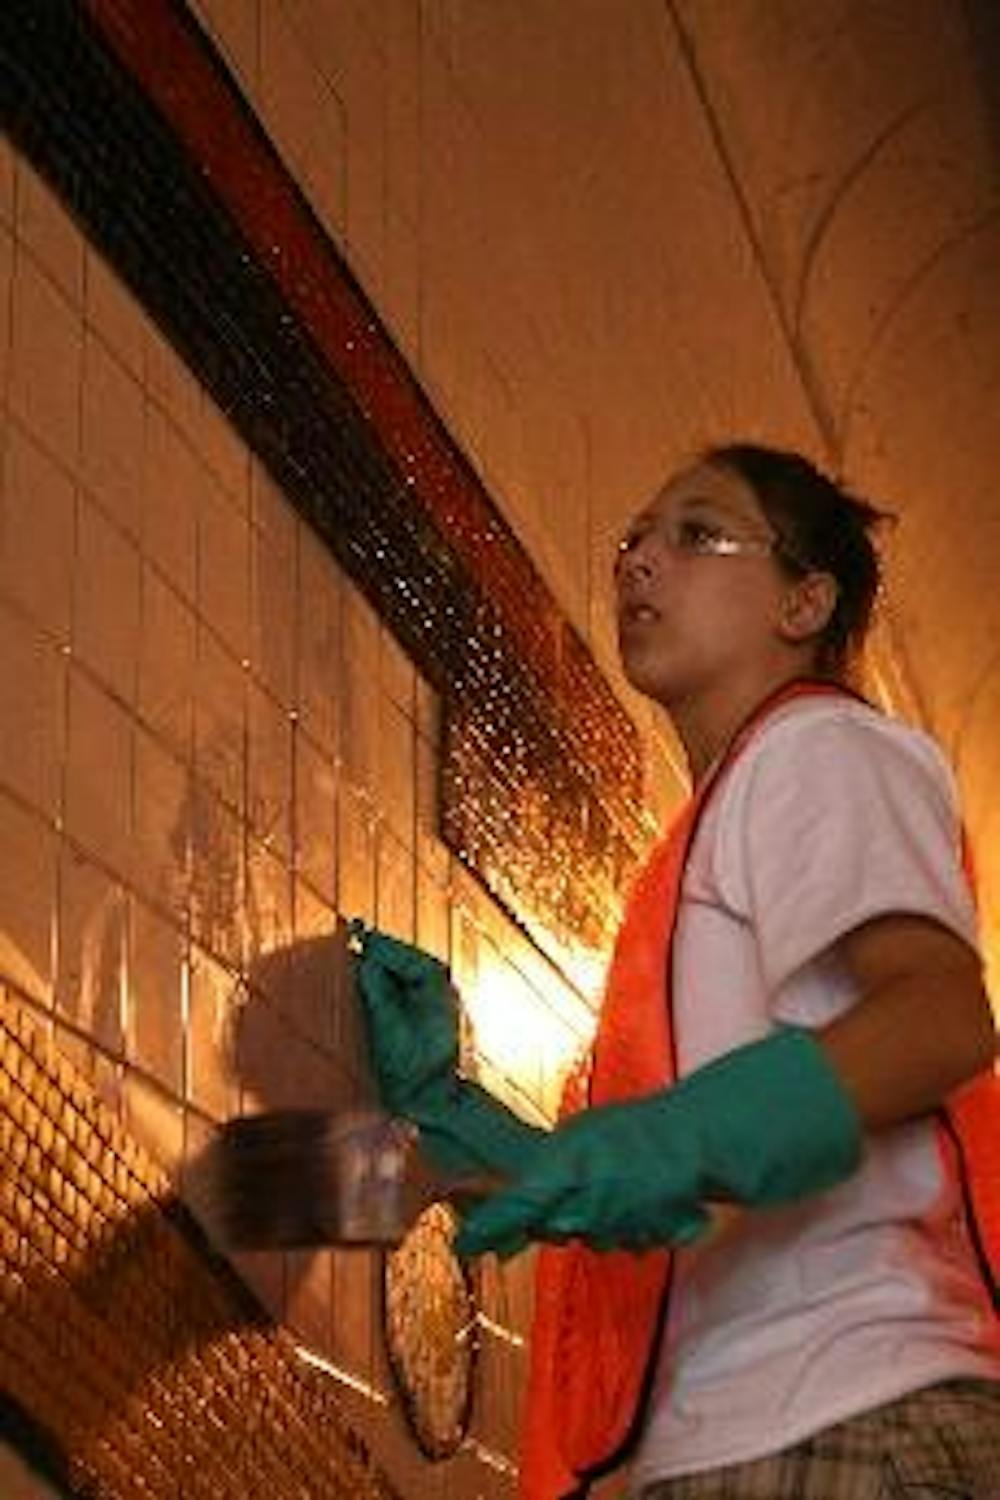 ART AS SERVICE- Freshman Celia Daly helps finish working on a mosaic mural in a 12th Street tunnel in downtown D.C. Daly and the rest of her group were working with City Arts, a nonprofit arts organization.